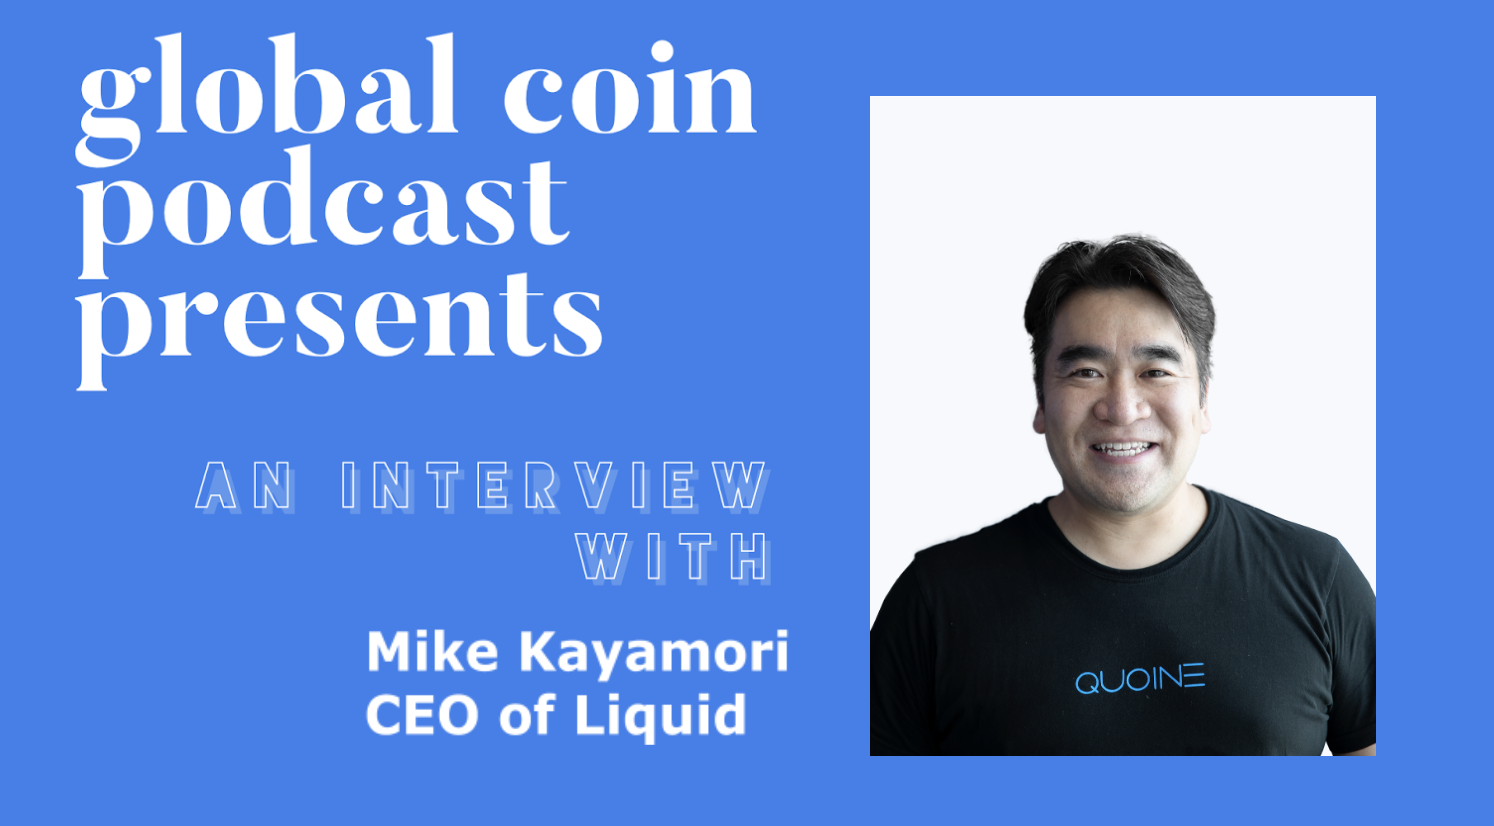 Liquid CEO Mike Kayamori on the regulatory environment in Japan, and advice for new projects looking to enter the Japanese market